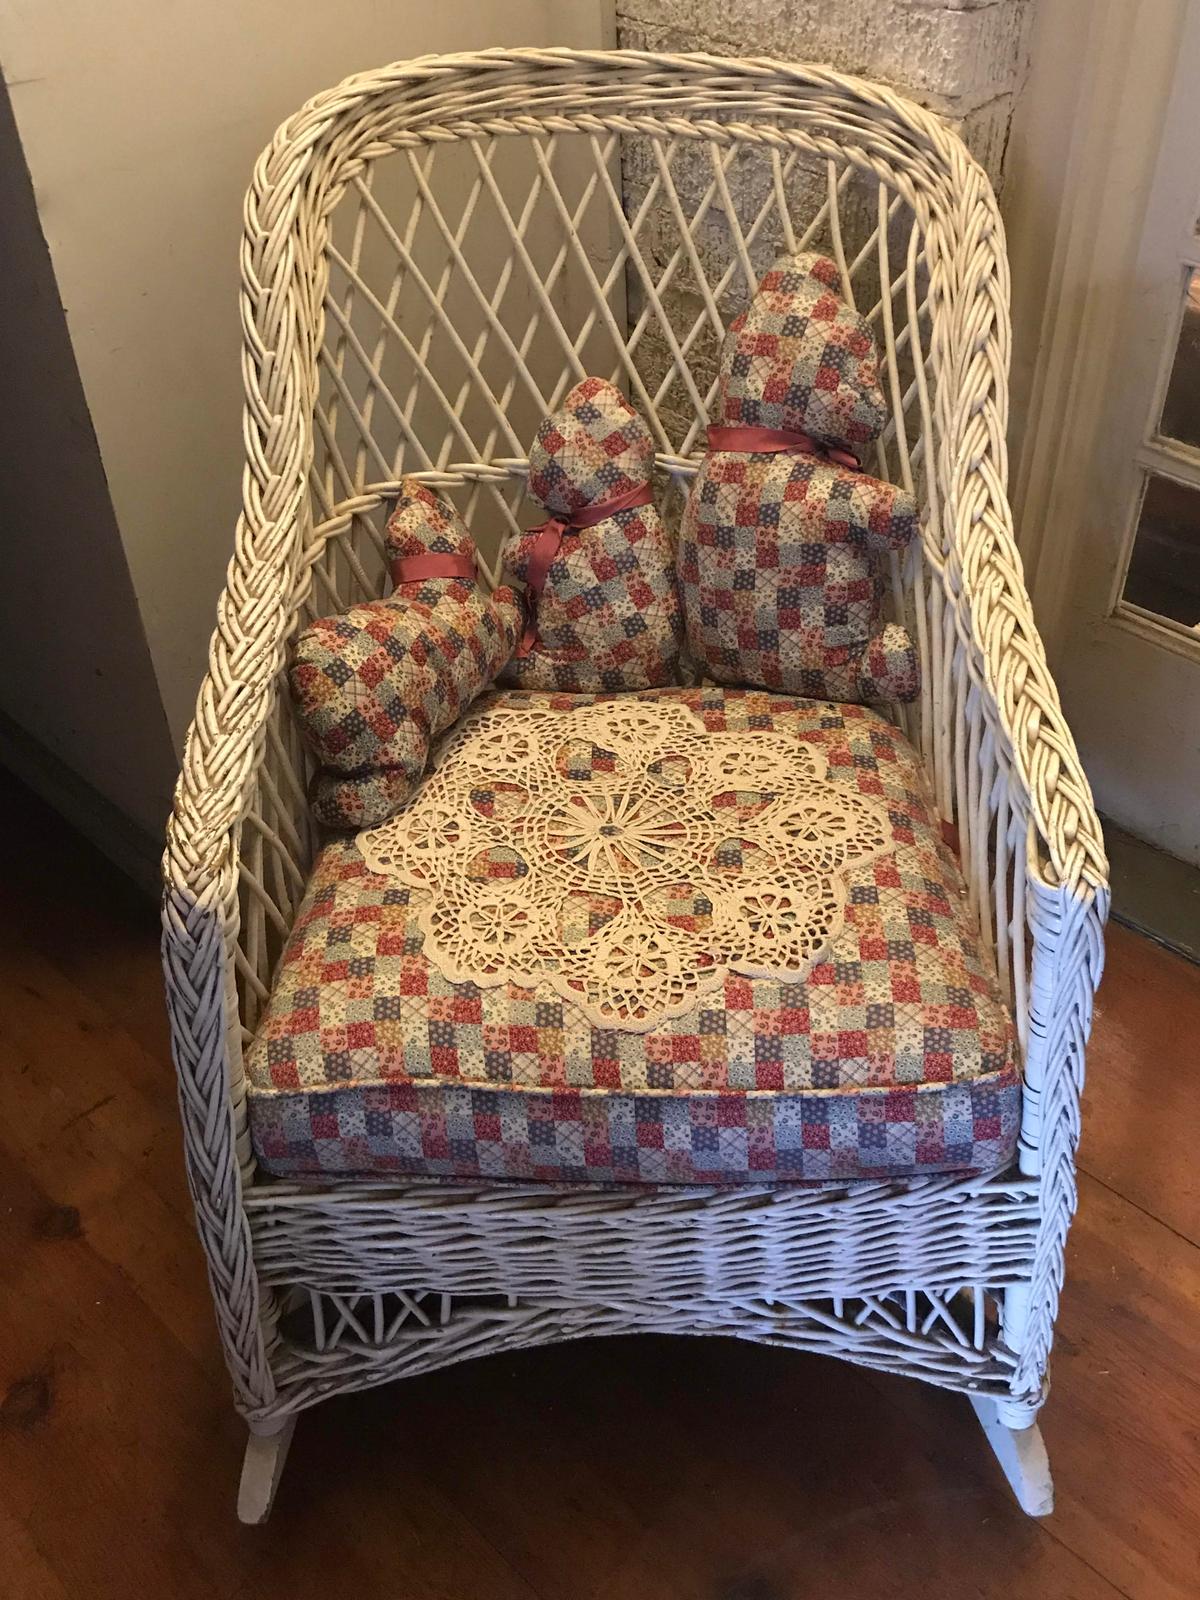 Vintage Wicker Rocking Chair with Patchwork Upholstered Seat & Matching Animals